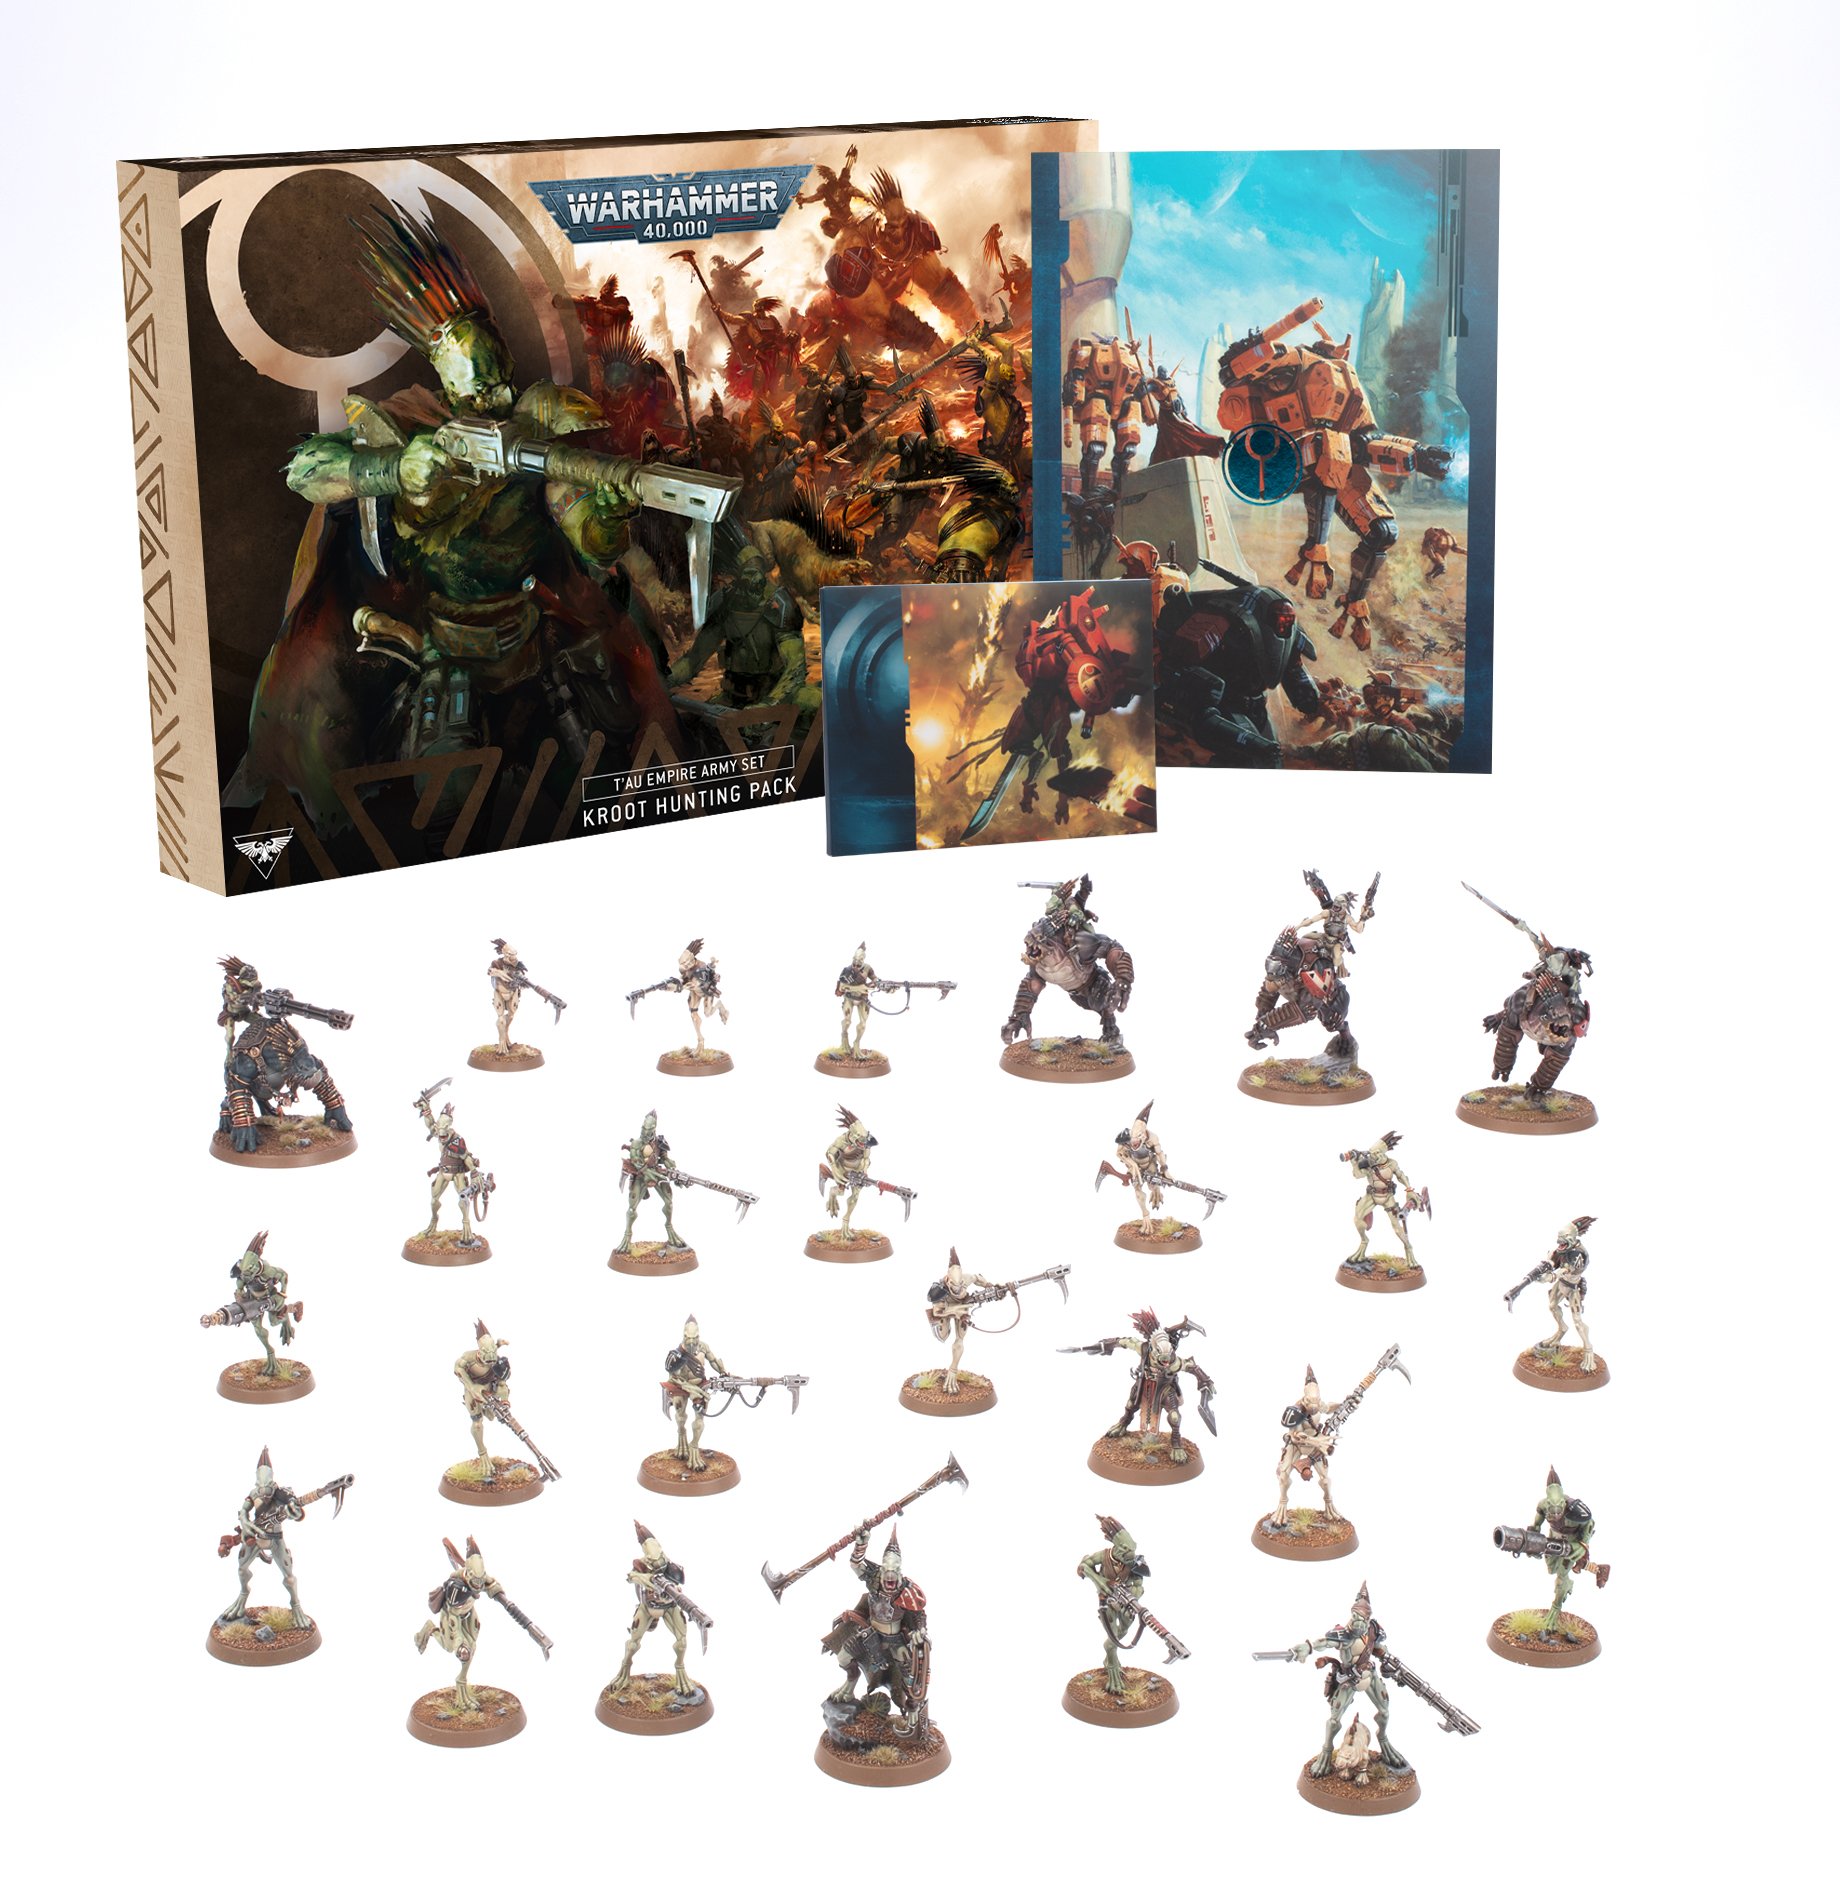 kroot hunting pack contents